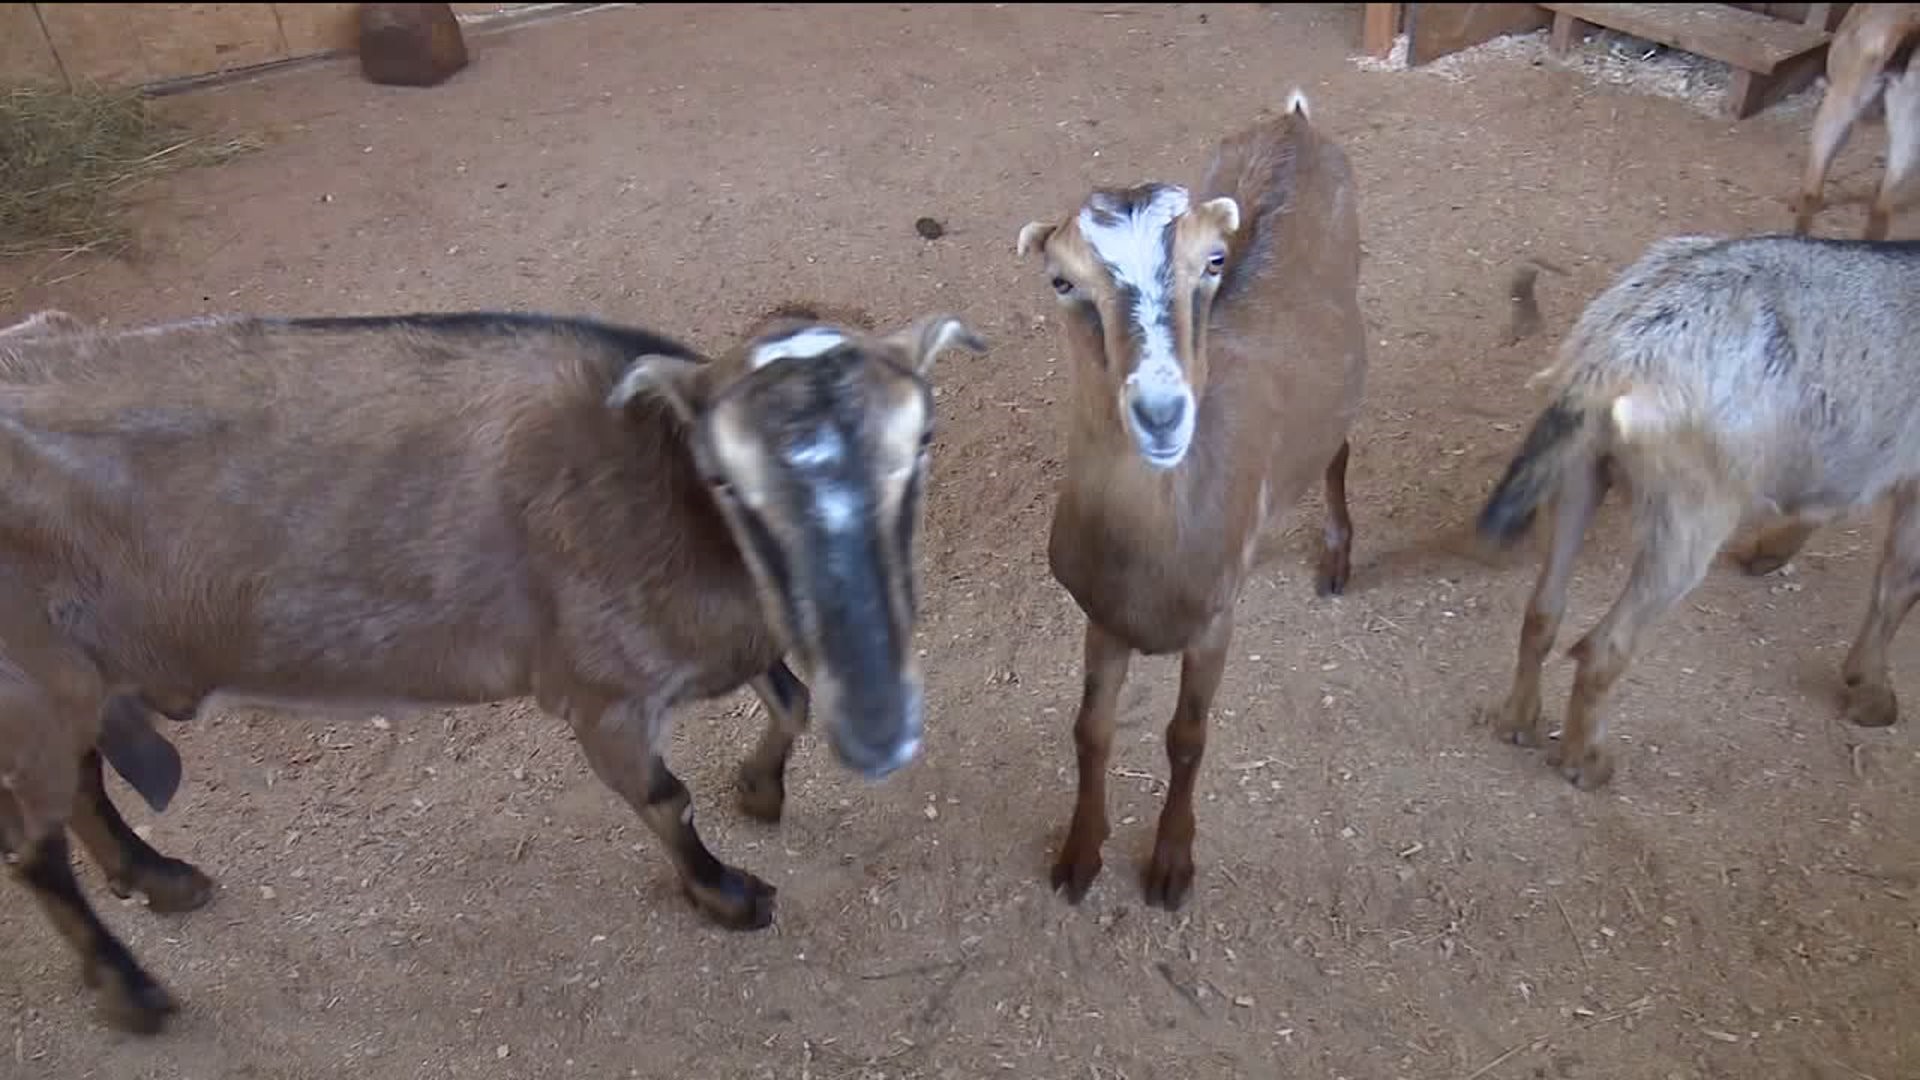 Animal Sanctuary Seeking Help to Care for Rescued Goats